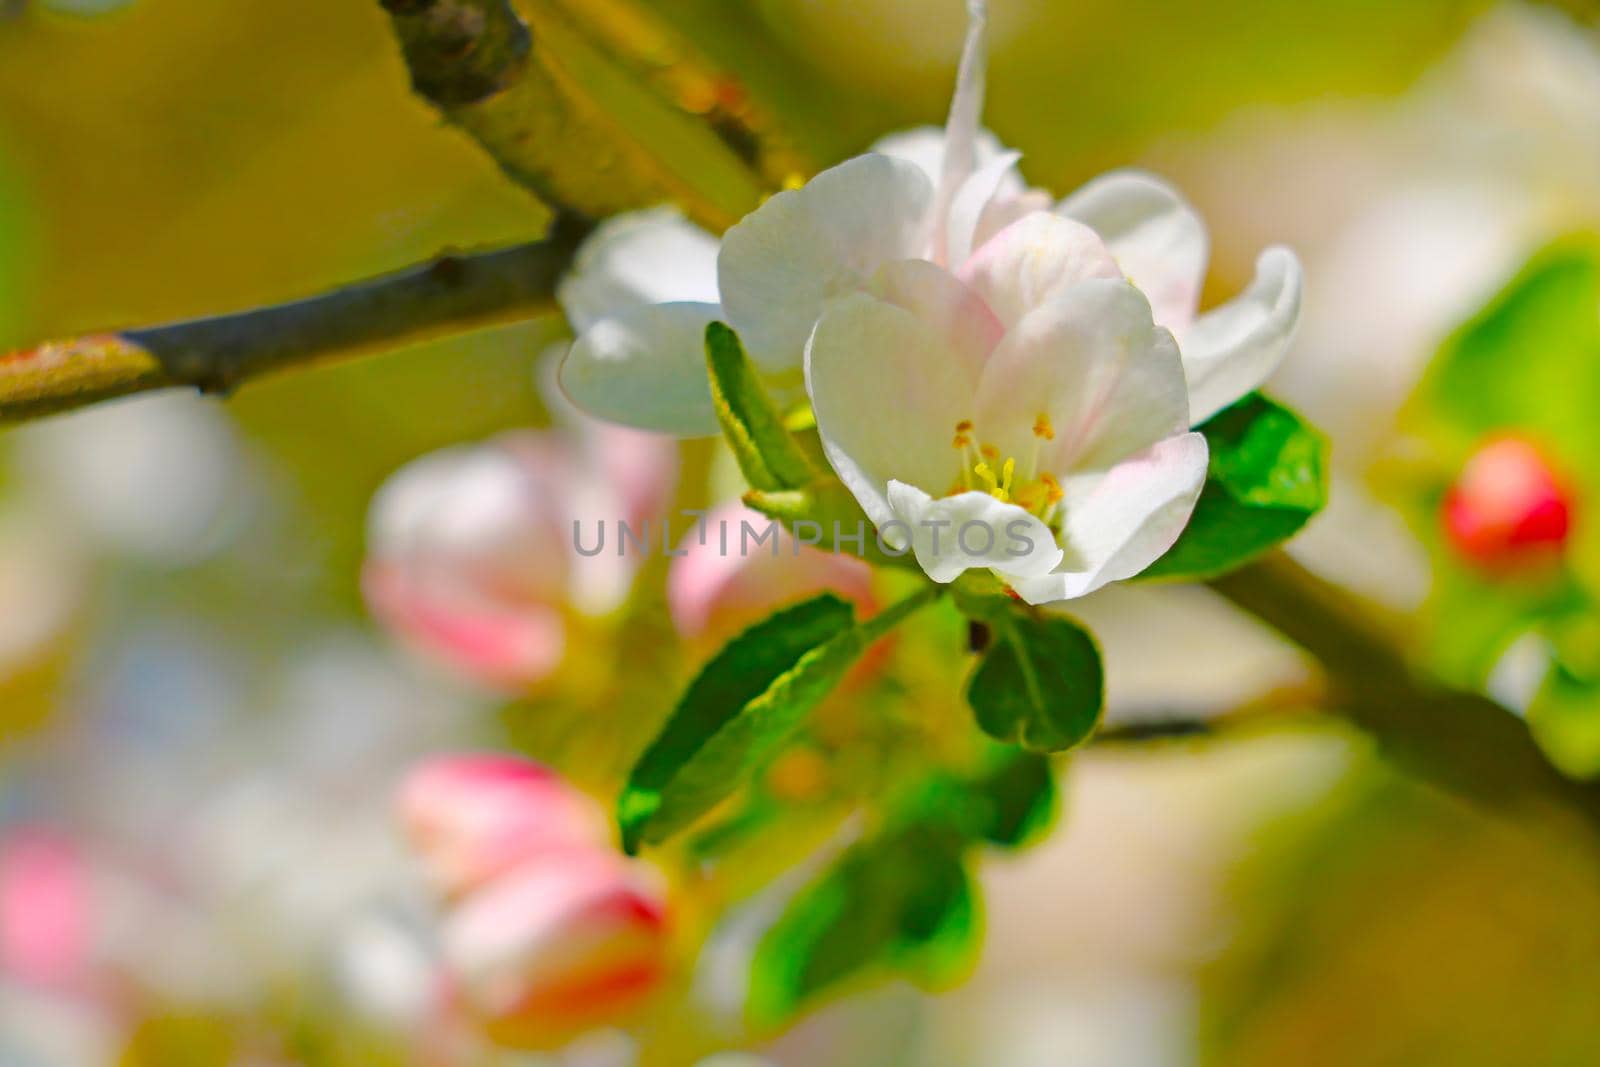 Blooming branch of an apple tree in the garden